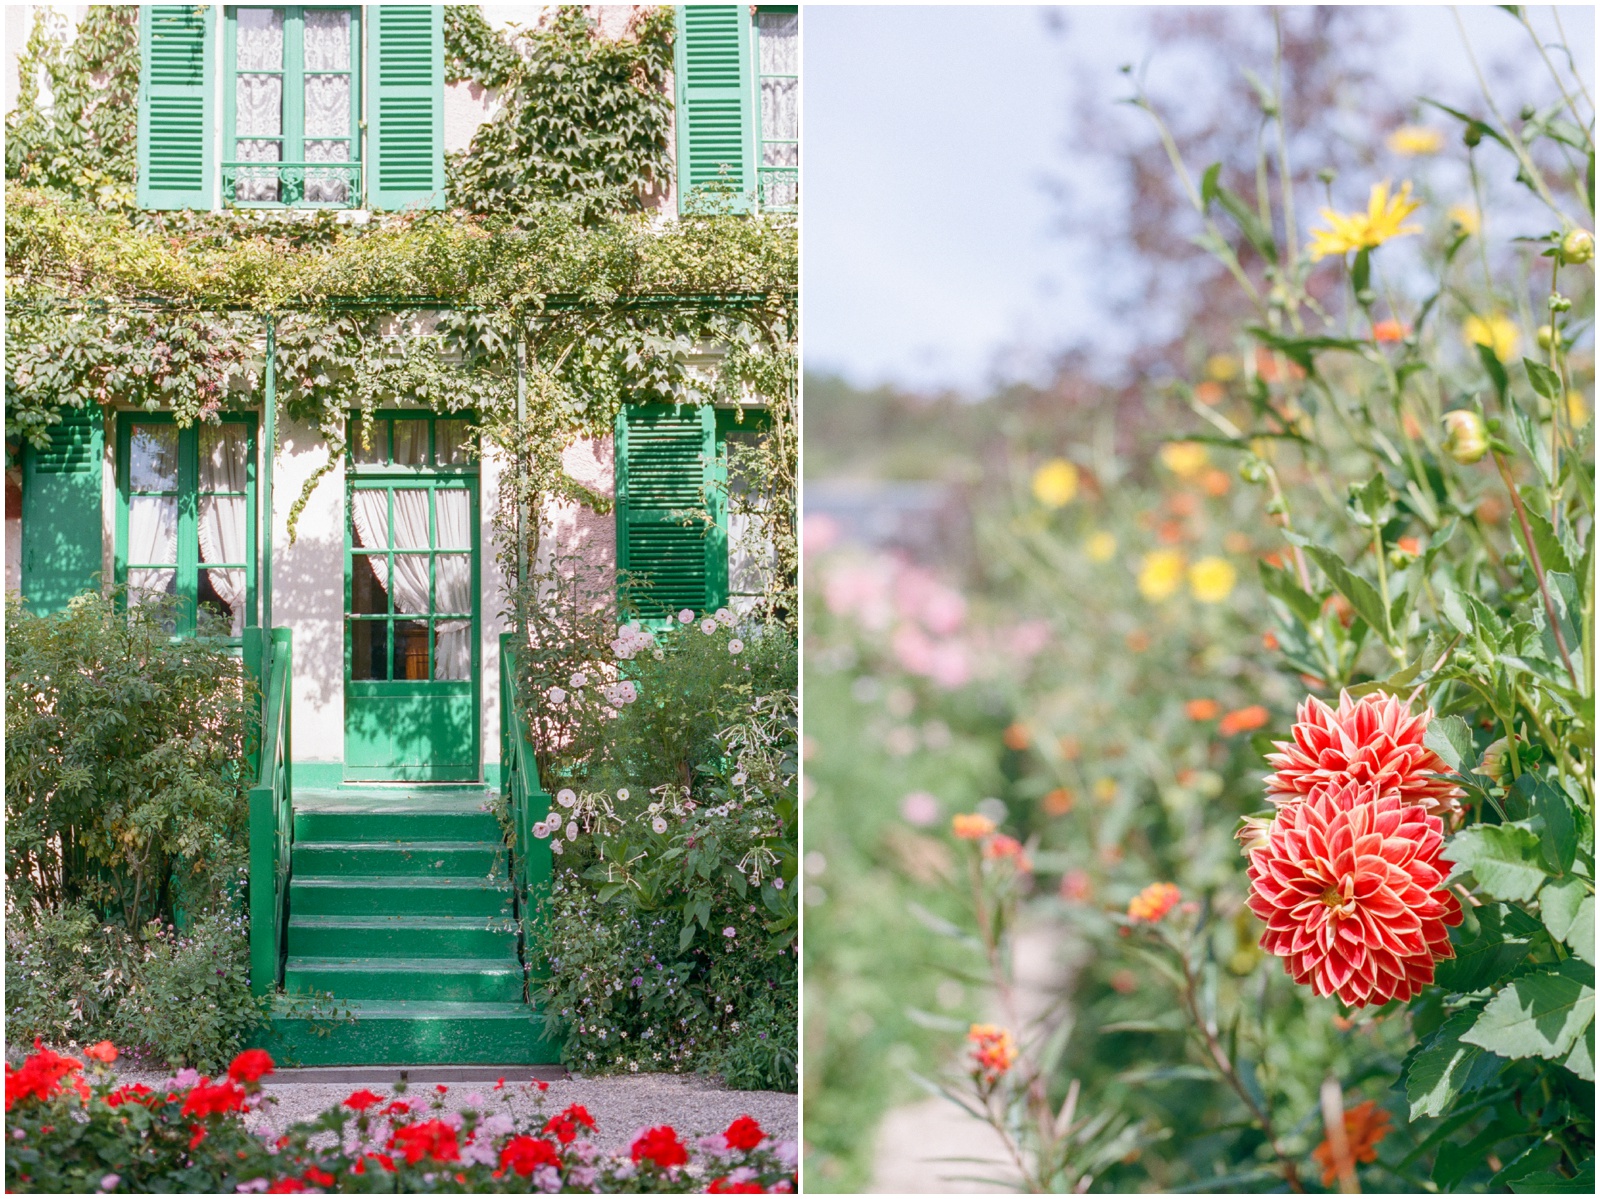 Monet House and Gardens in Giverny France